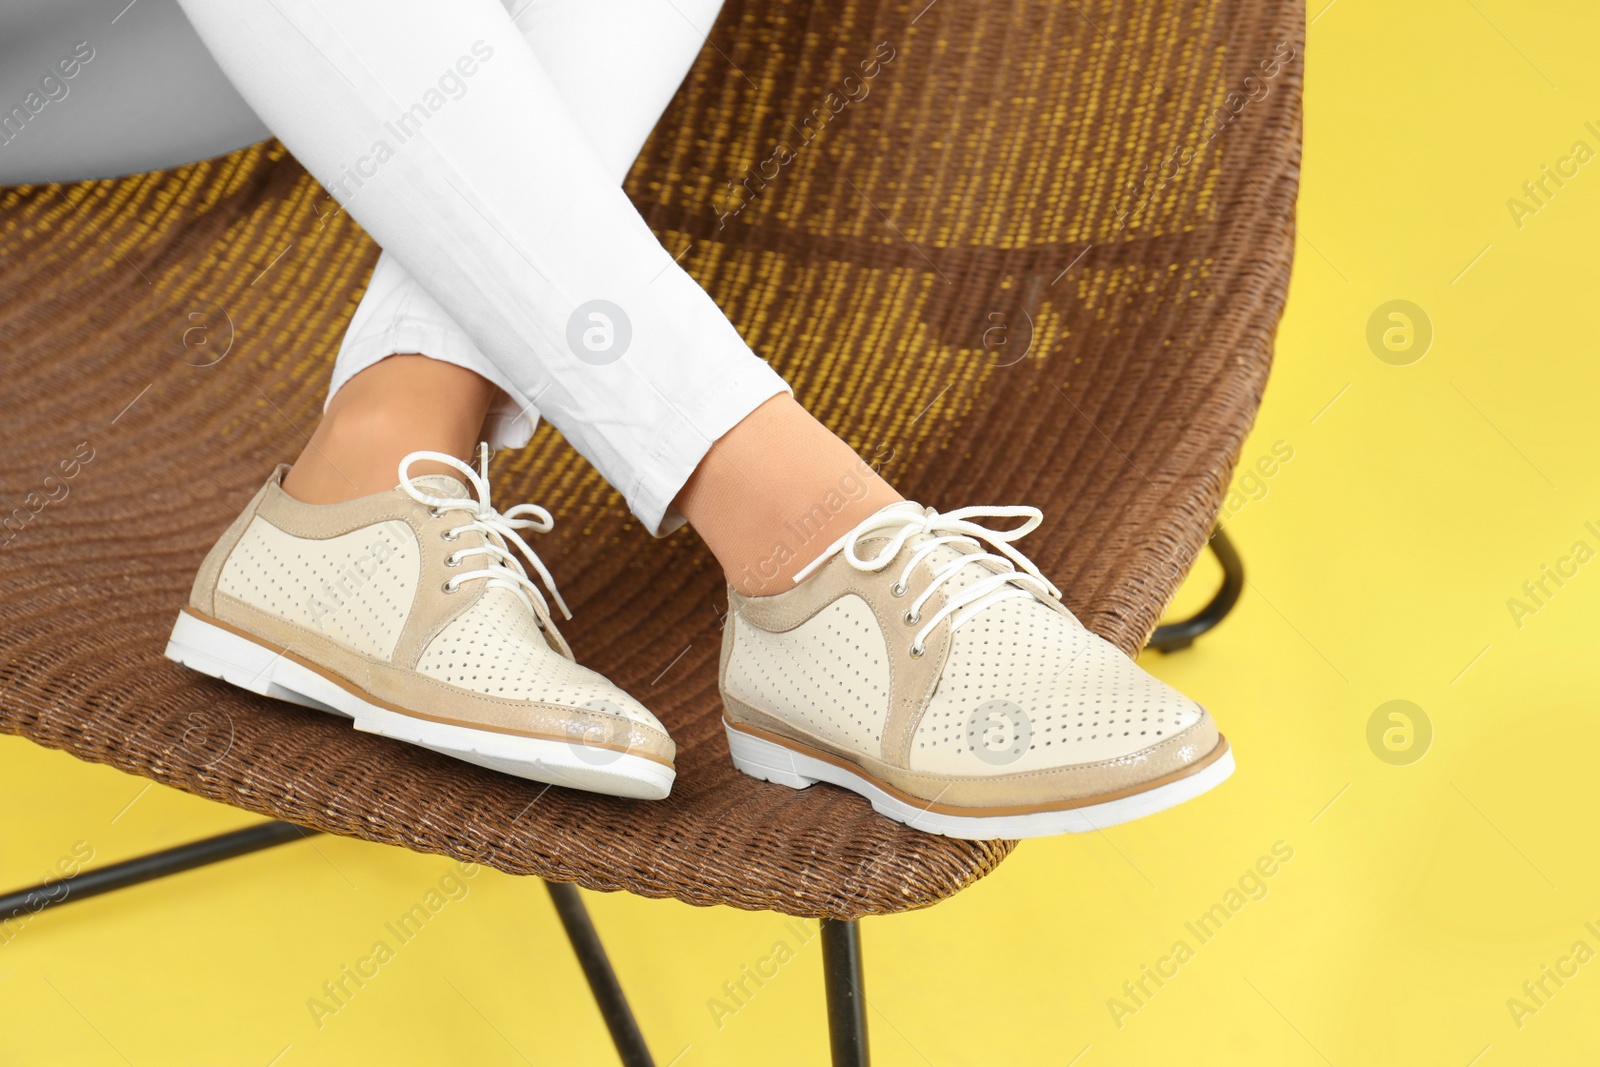 Photo of Woman in stylish shoes sitting on chair, color background